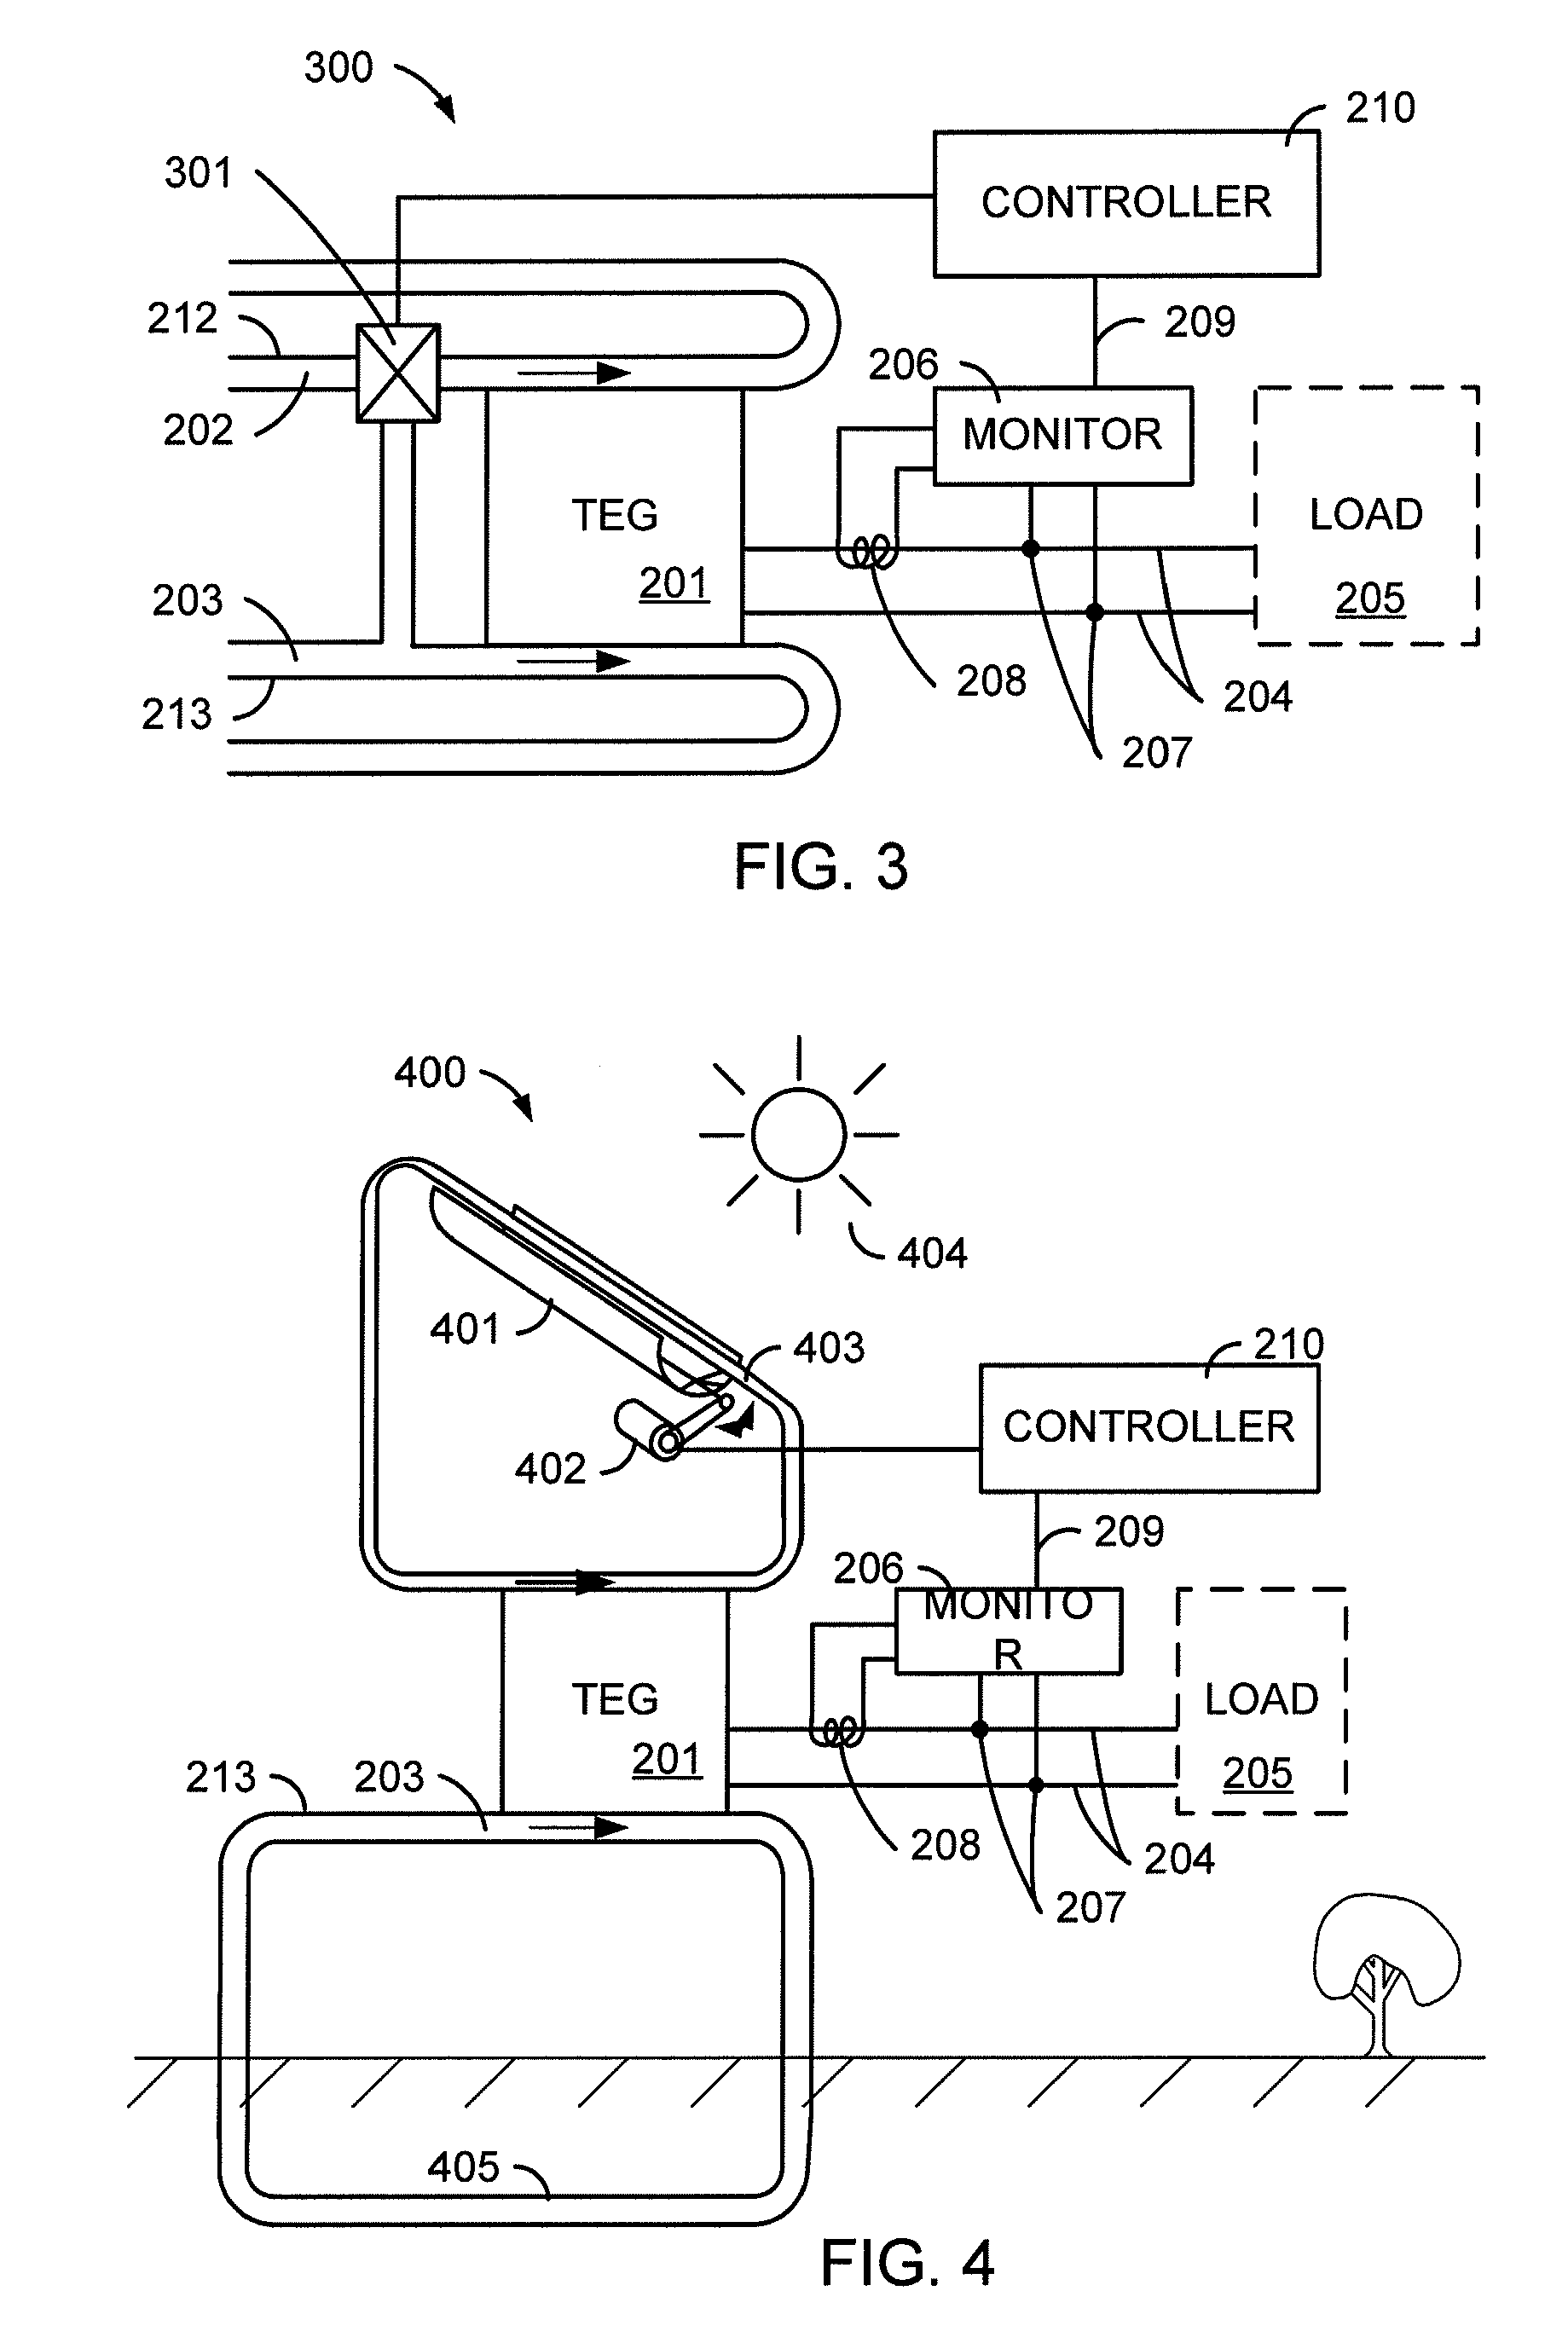 Automatic configuration of thermoelectric generation system to load requirements